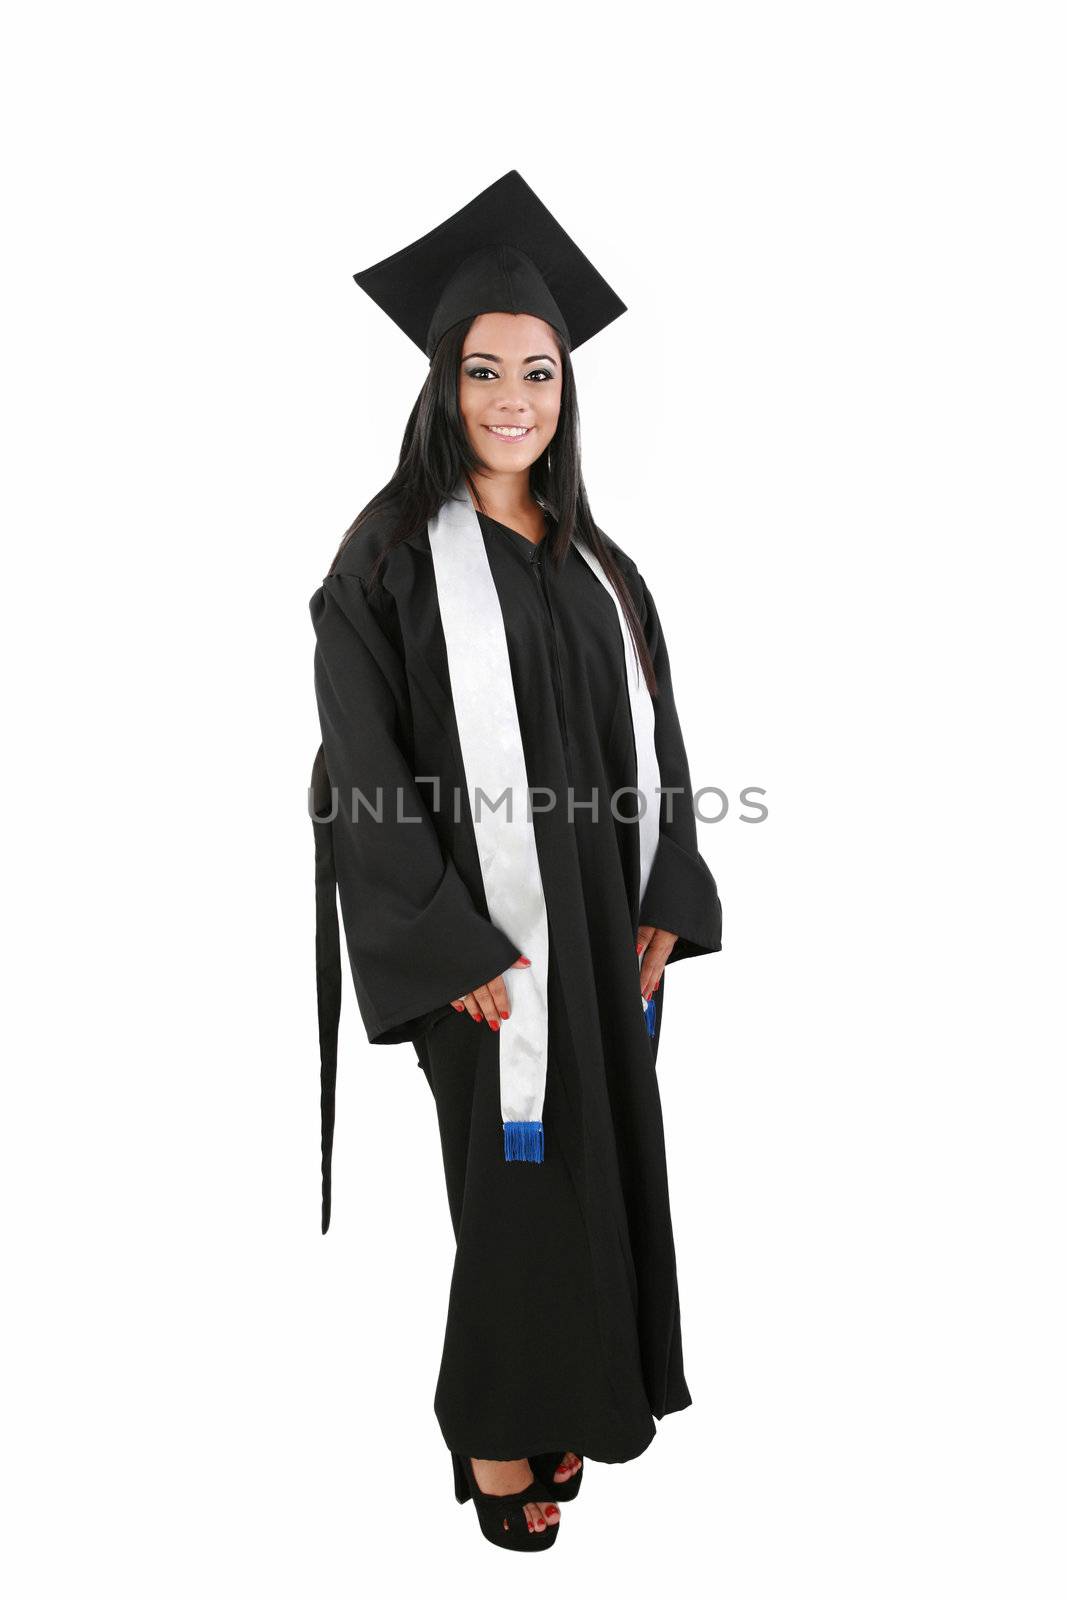 Female graduate smiling isolated over a white background